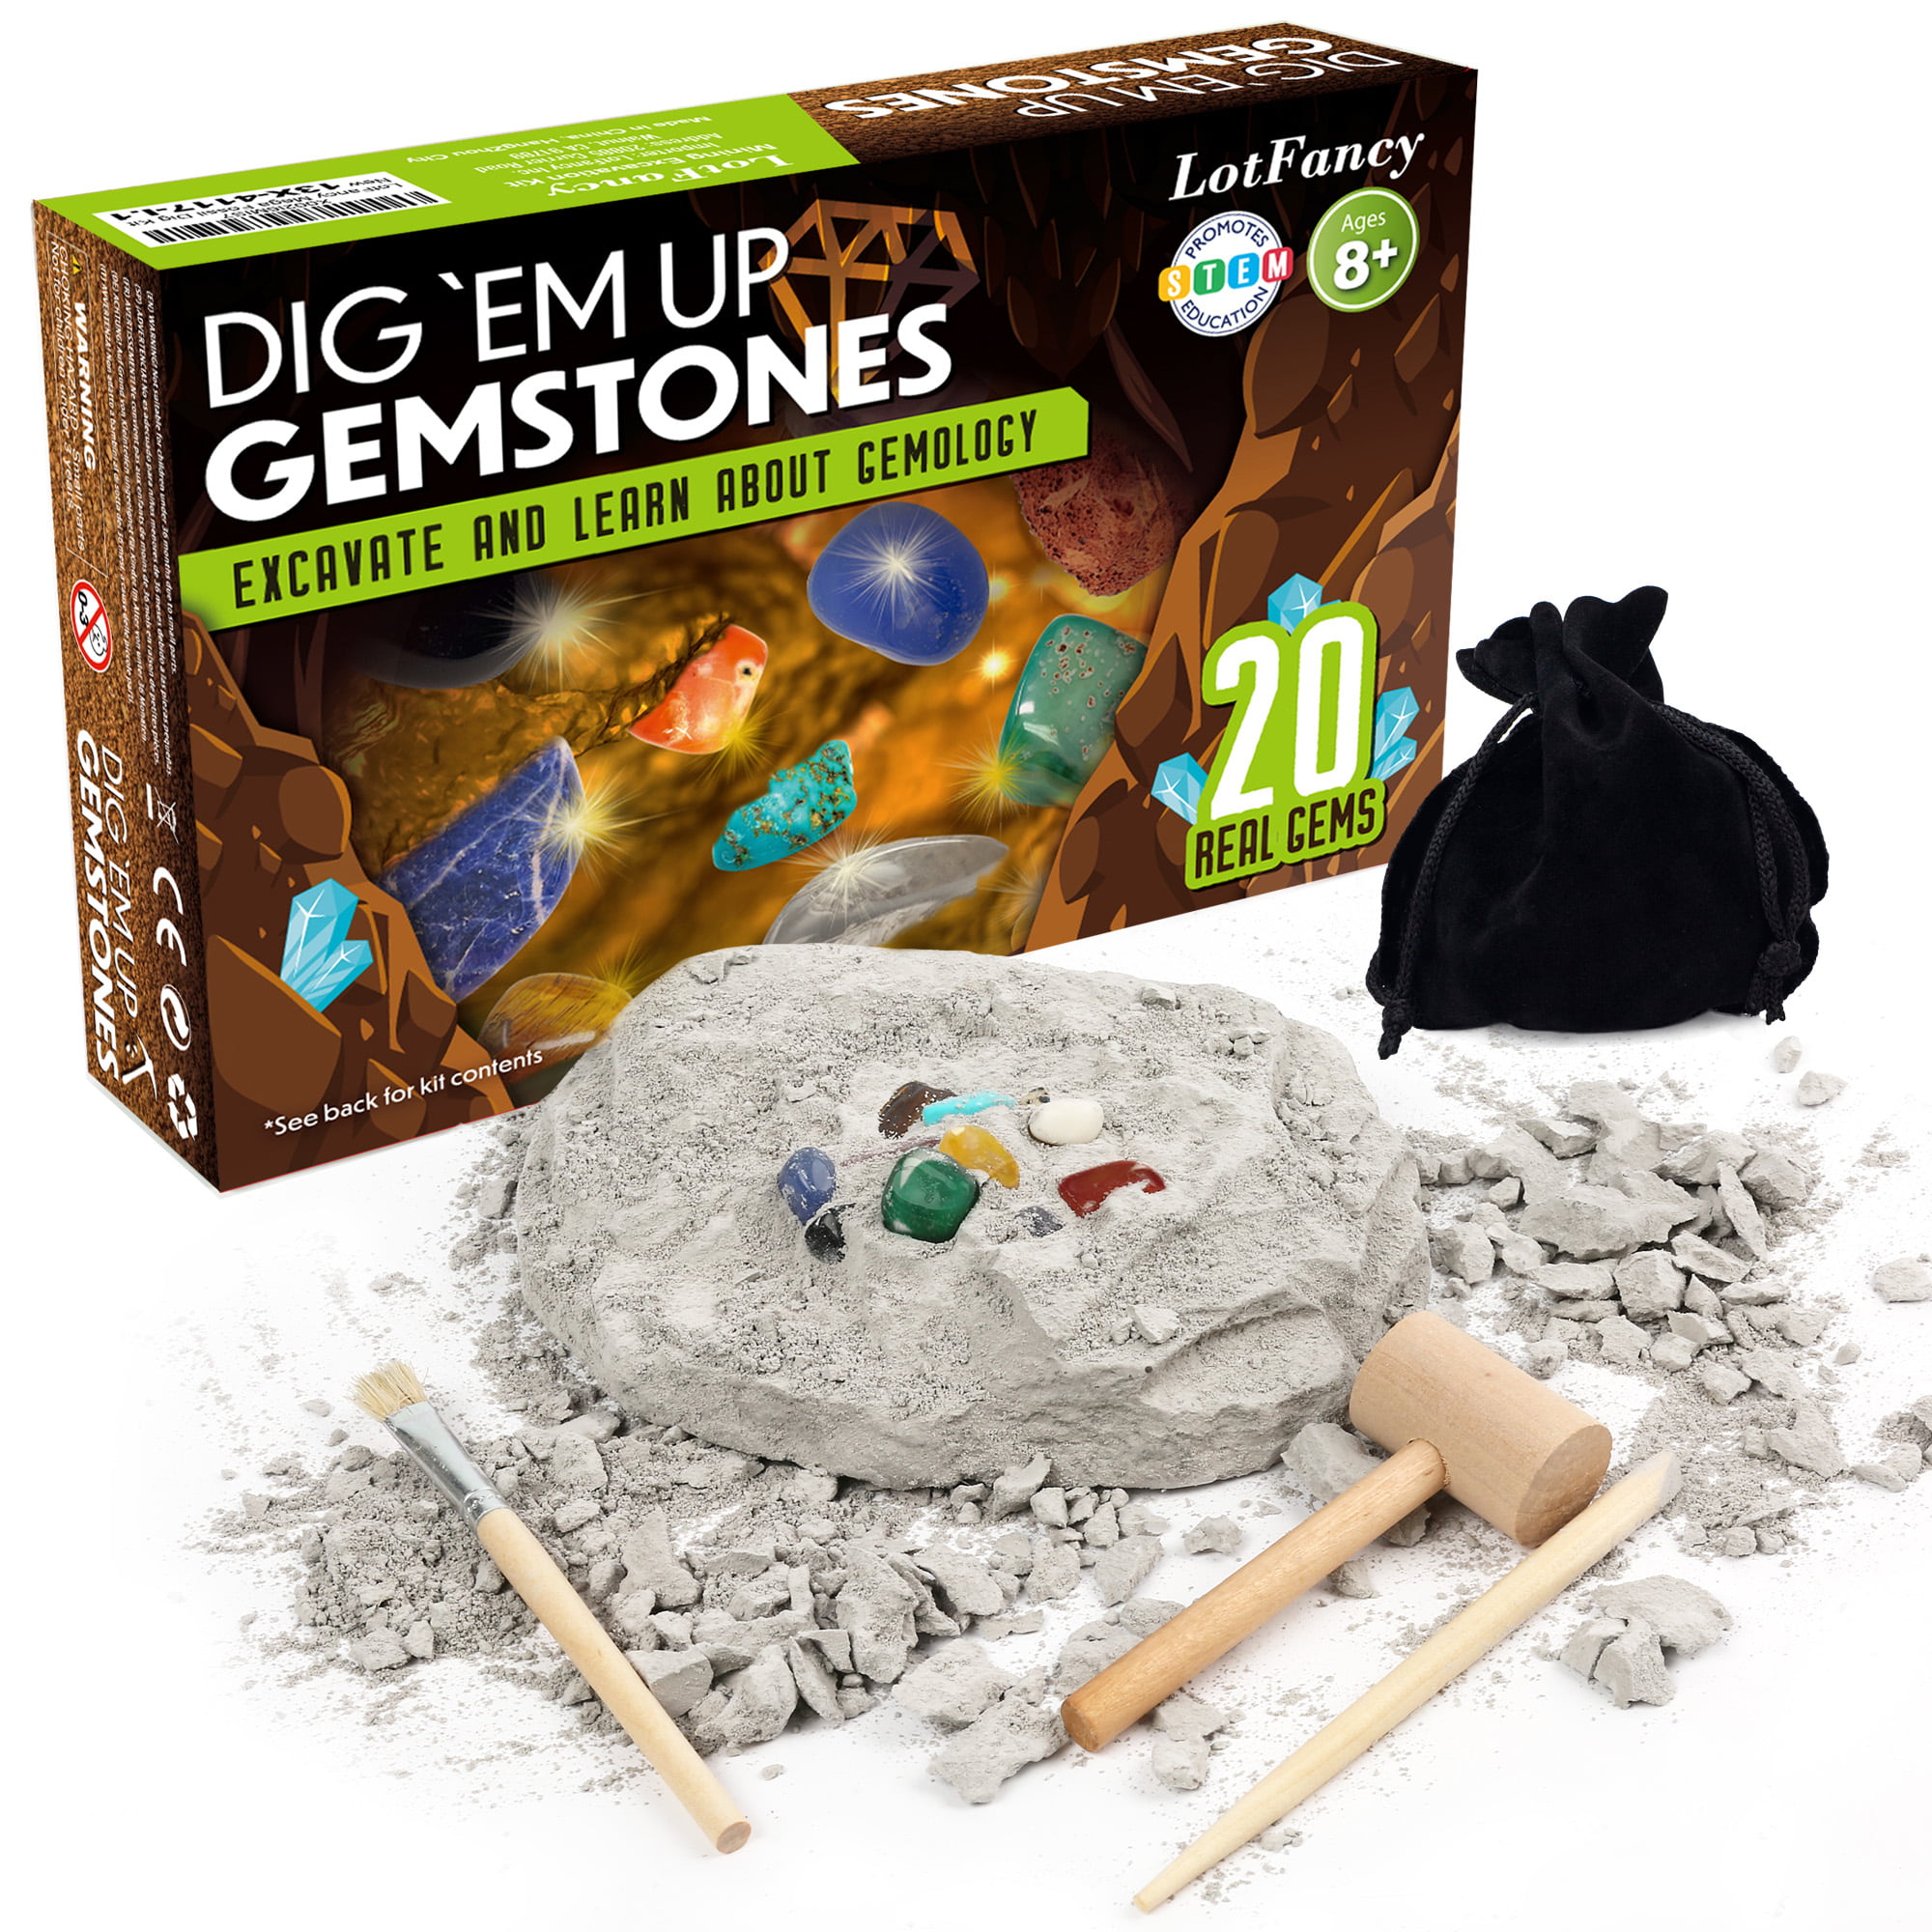 NEW World Of Science Crystal Gems Digging Kit Toy Five Tumblestones To Find Gift 